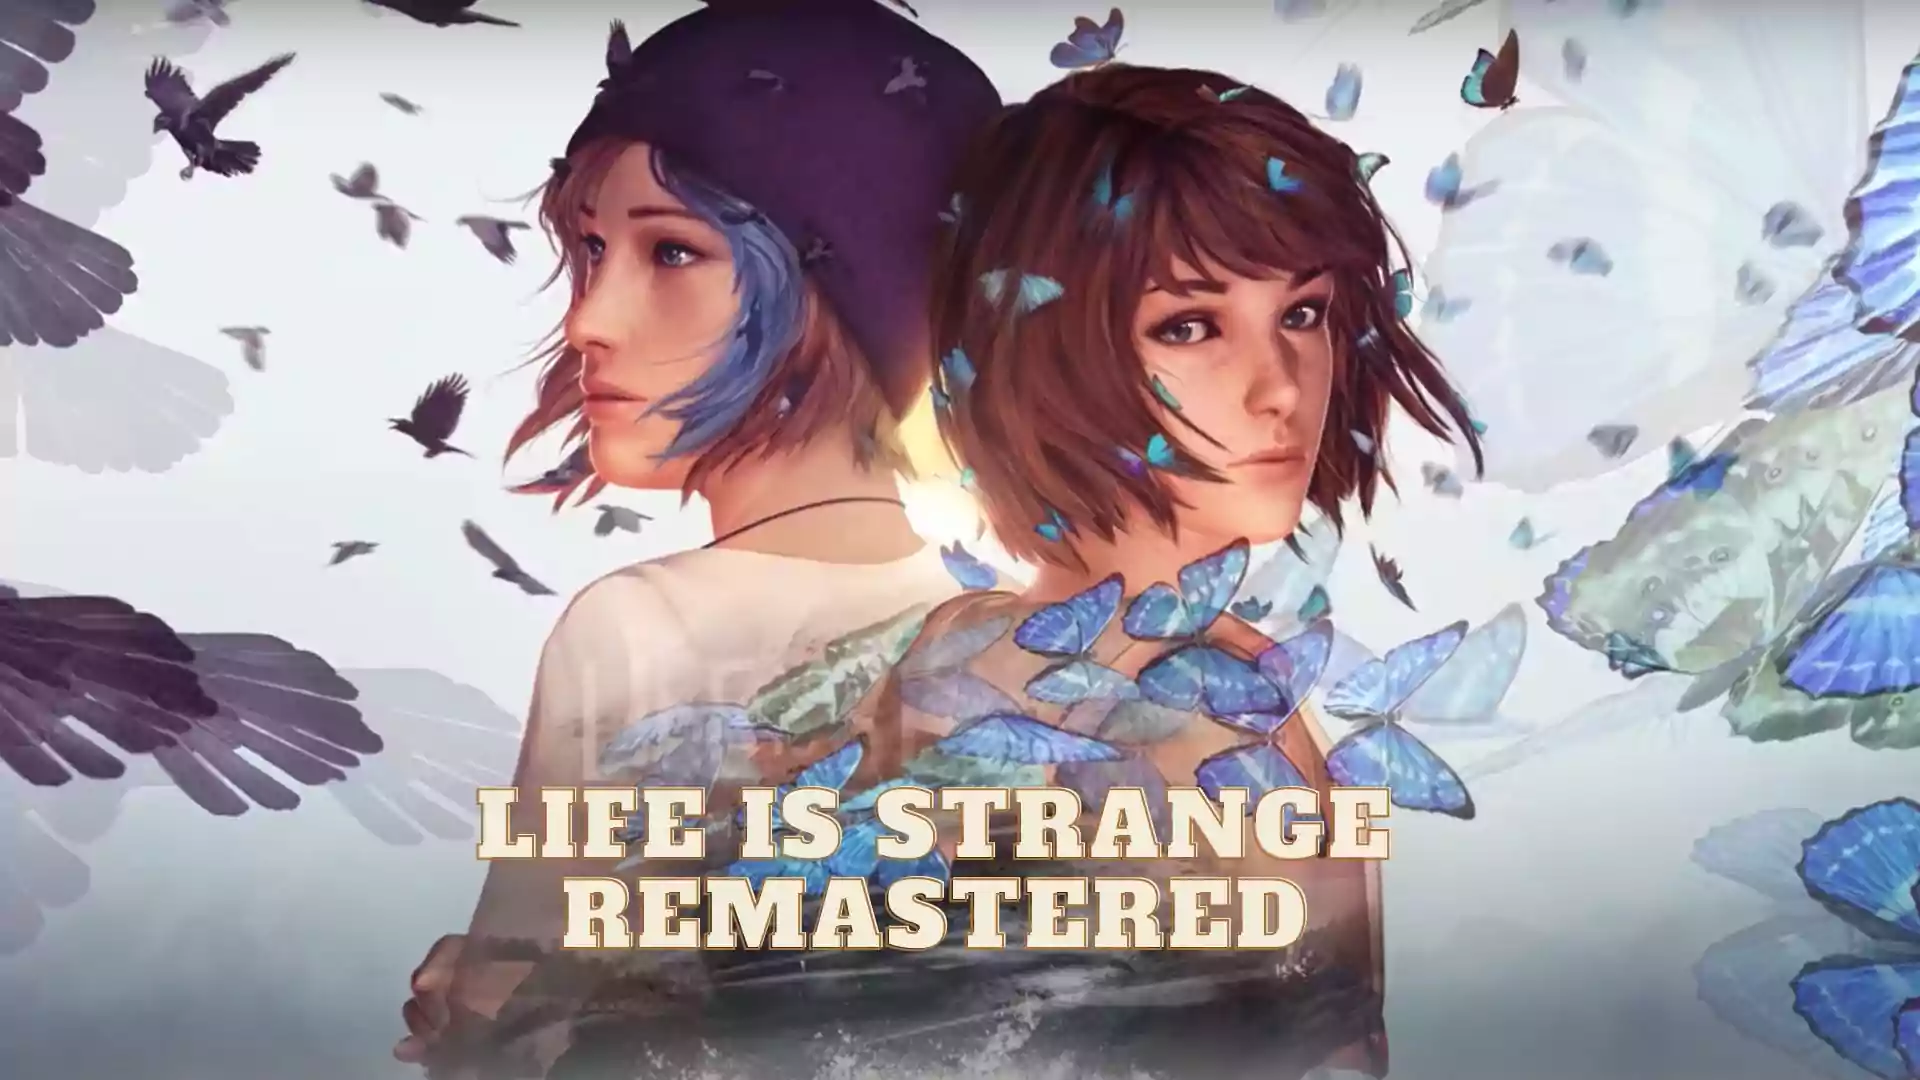 Life is Strange Remastered Parents Guide and age rating | 2022